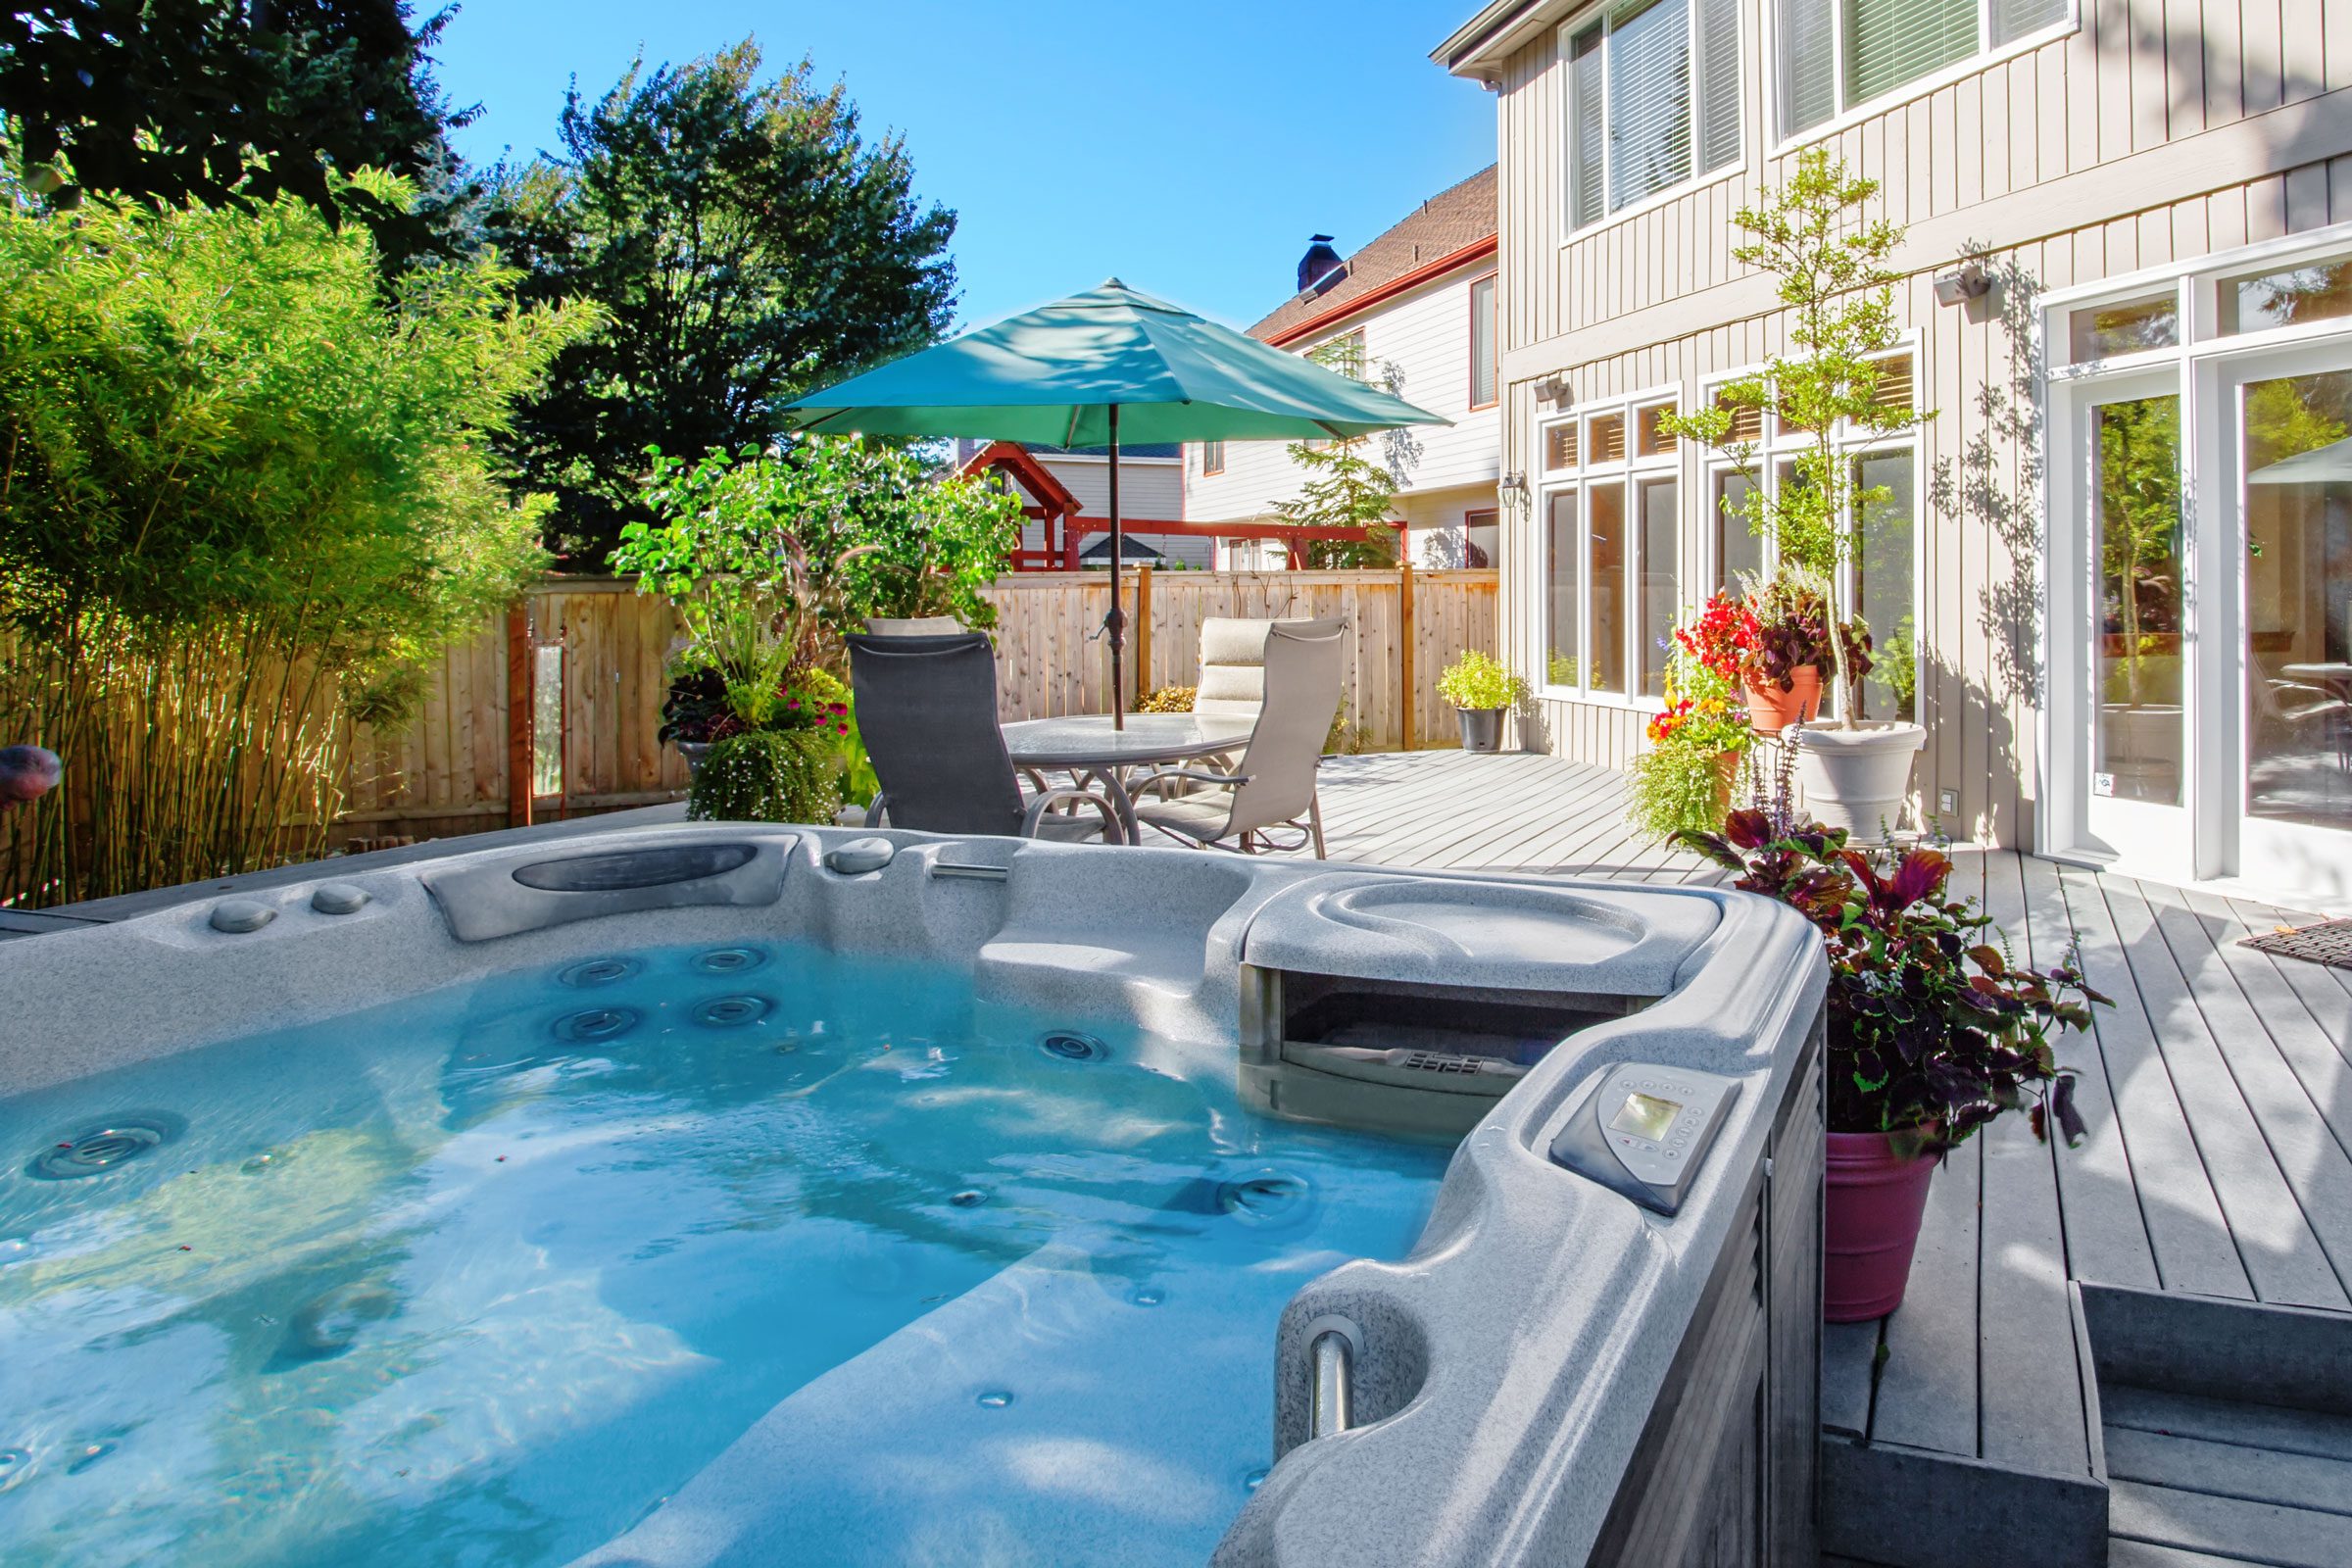 Will a Hot Tub Increase My Home's Value?